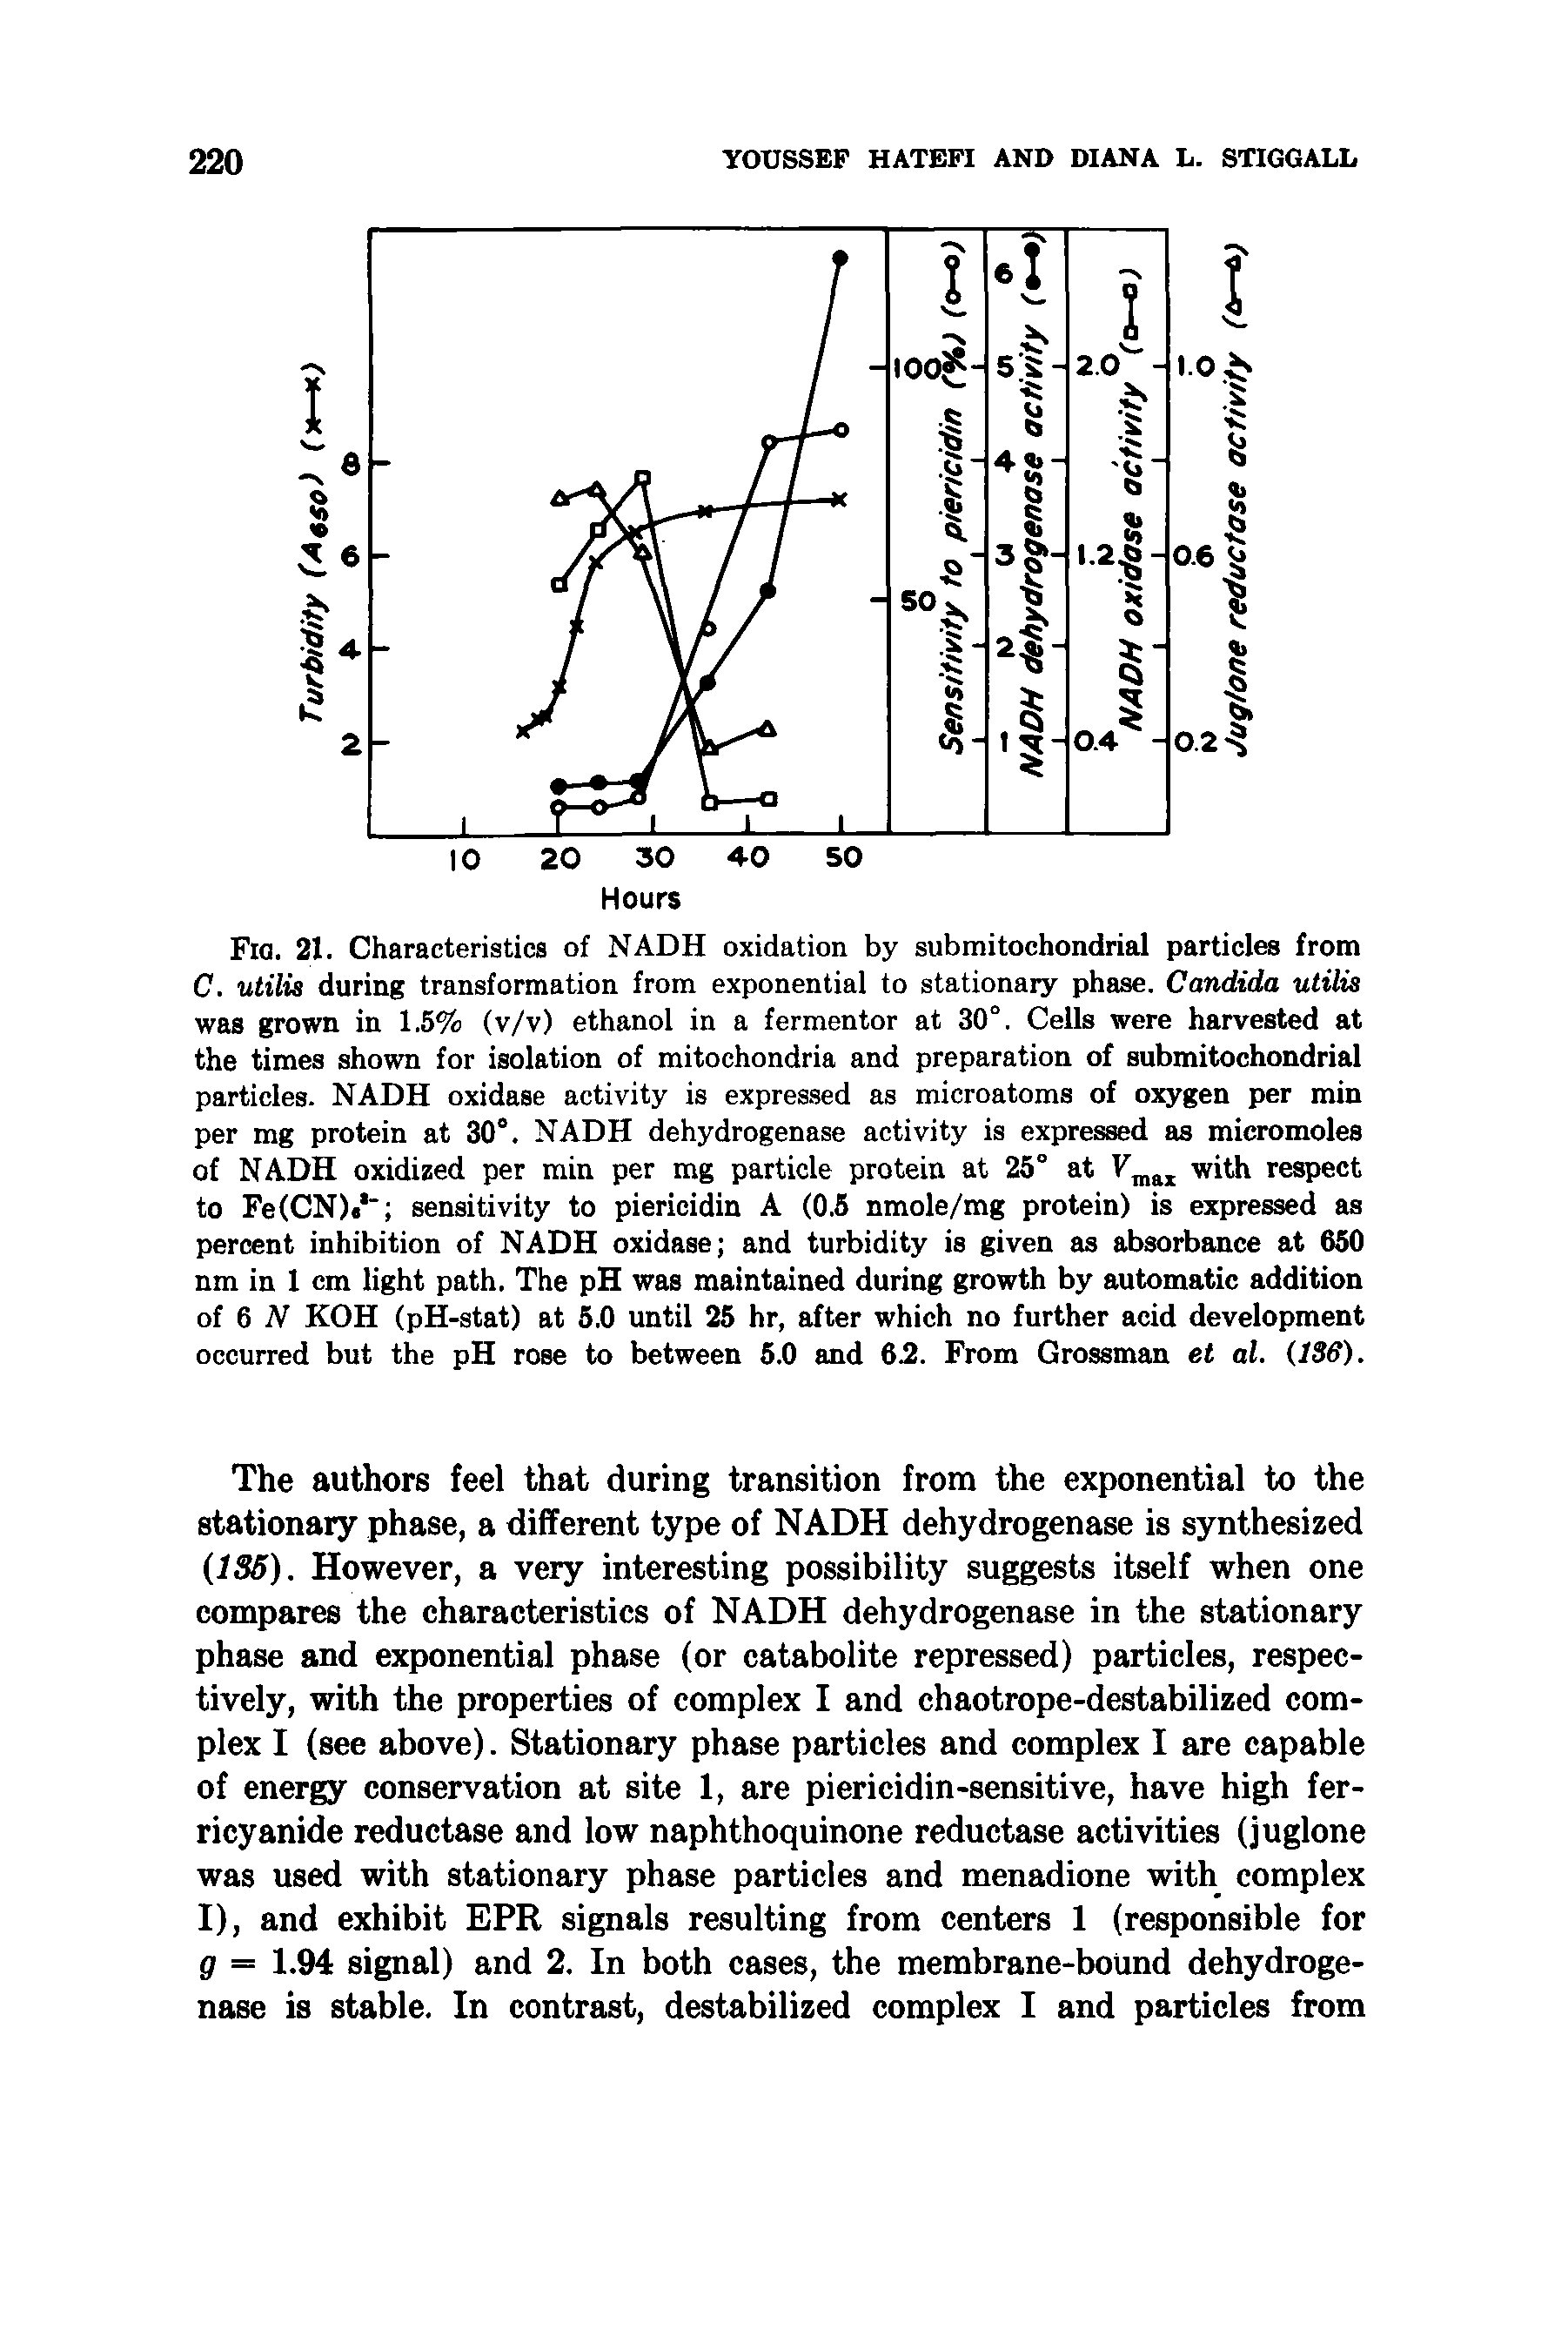 Fig. 21. Characteristics of NADH oxidation by submitochondrial particles from C. utilis during transformation from exponential to stationary phase. Candida utilis was grown in 1.5% (v/v) ethanol in a fermentor at 30°. Cells were harvested at the times shown for isolation of mitochondria and preparation of submitochondrial particles. NADH oxidase activity is expres.sed as microatoms of oxygen per min per mg protein at 30°. NADH dehydrogenase activity is expressed as micromoles of NADH oxidized per min per mg particle protein at 25° at with respect to Fe(CN). " sensitivity to piericidin A (0.5 nmole/mg protein) is expressed as percent inhibition of NADH oxidase and turbidity is given as absorbance at 650 nm in 1 cm light path. The pH was maintained during growth by automatic addition of 6 N KOH (pH-stat) at 5.0 until 25 hr, after which no further acid development occurred but the pH rose to between 5.0 and 62. From Grossman et al. (ISS).